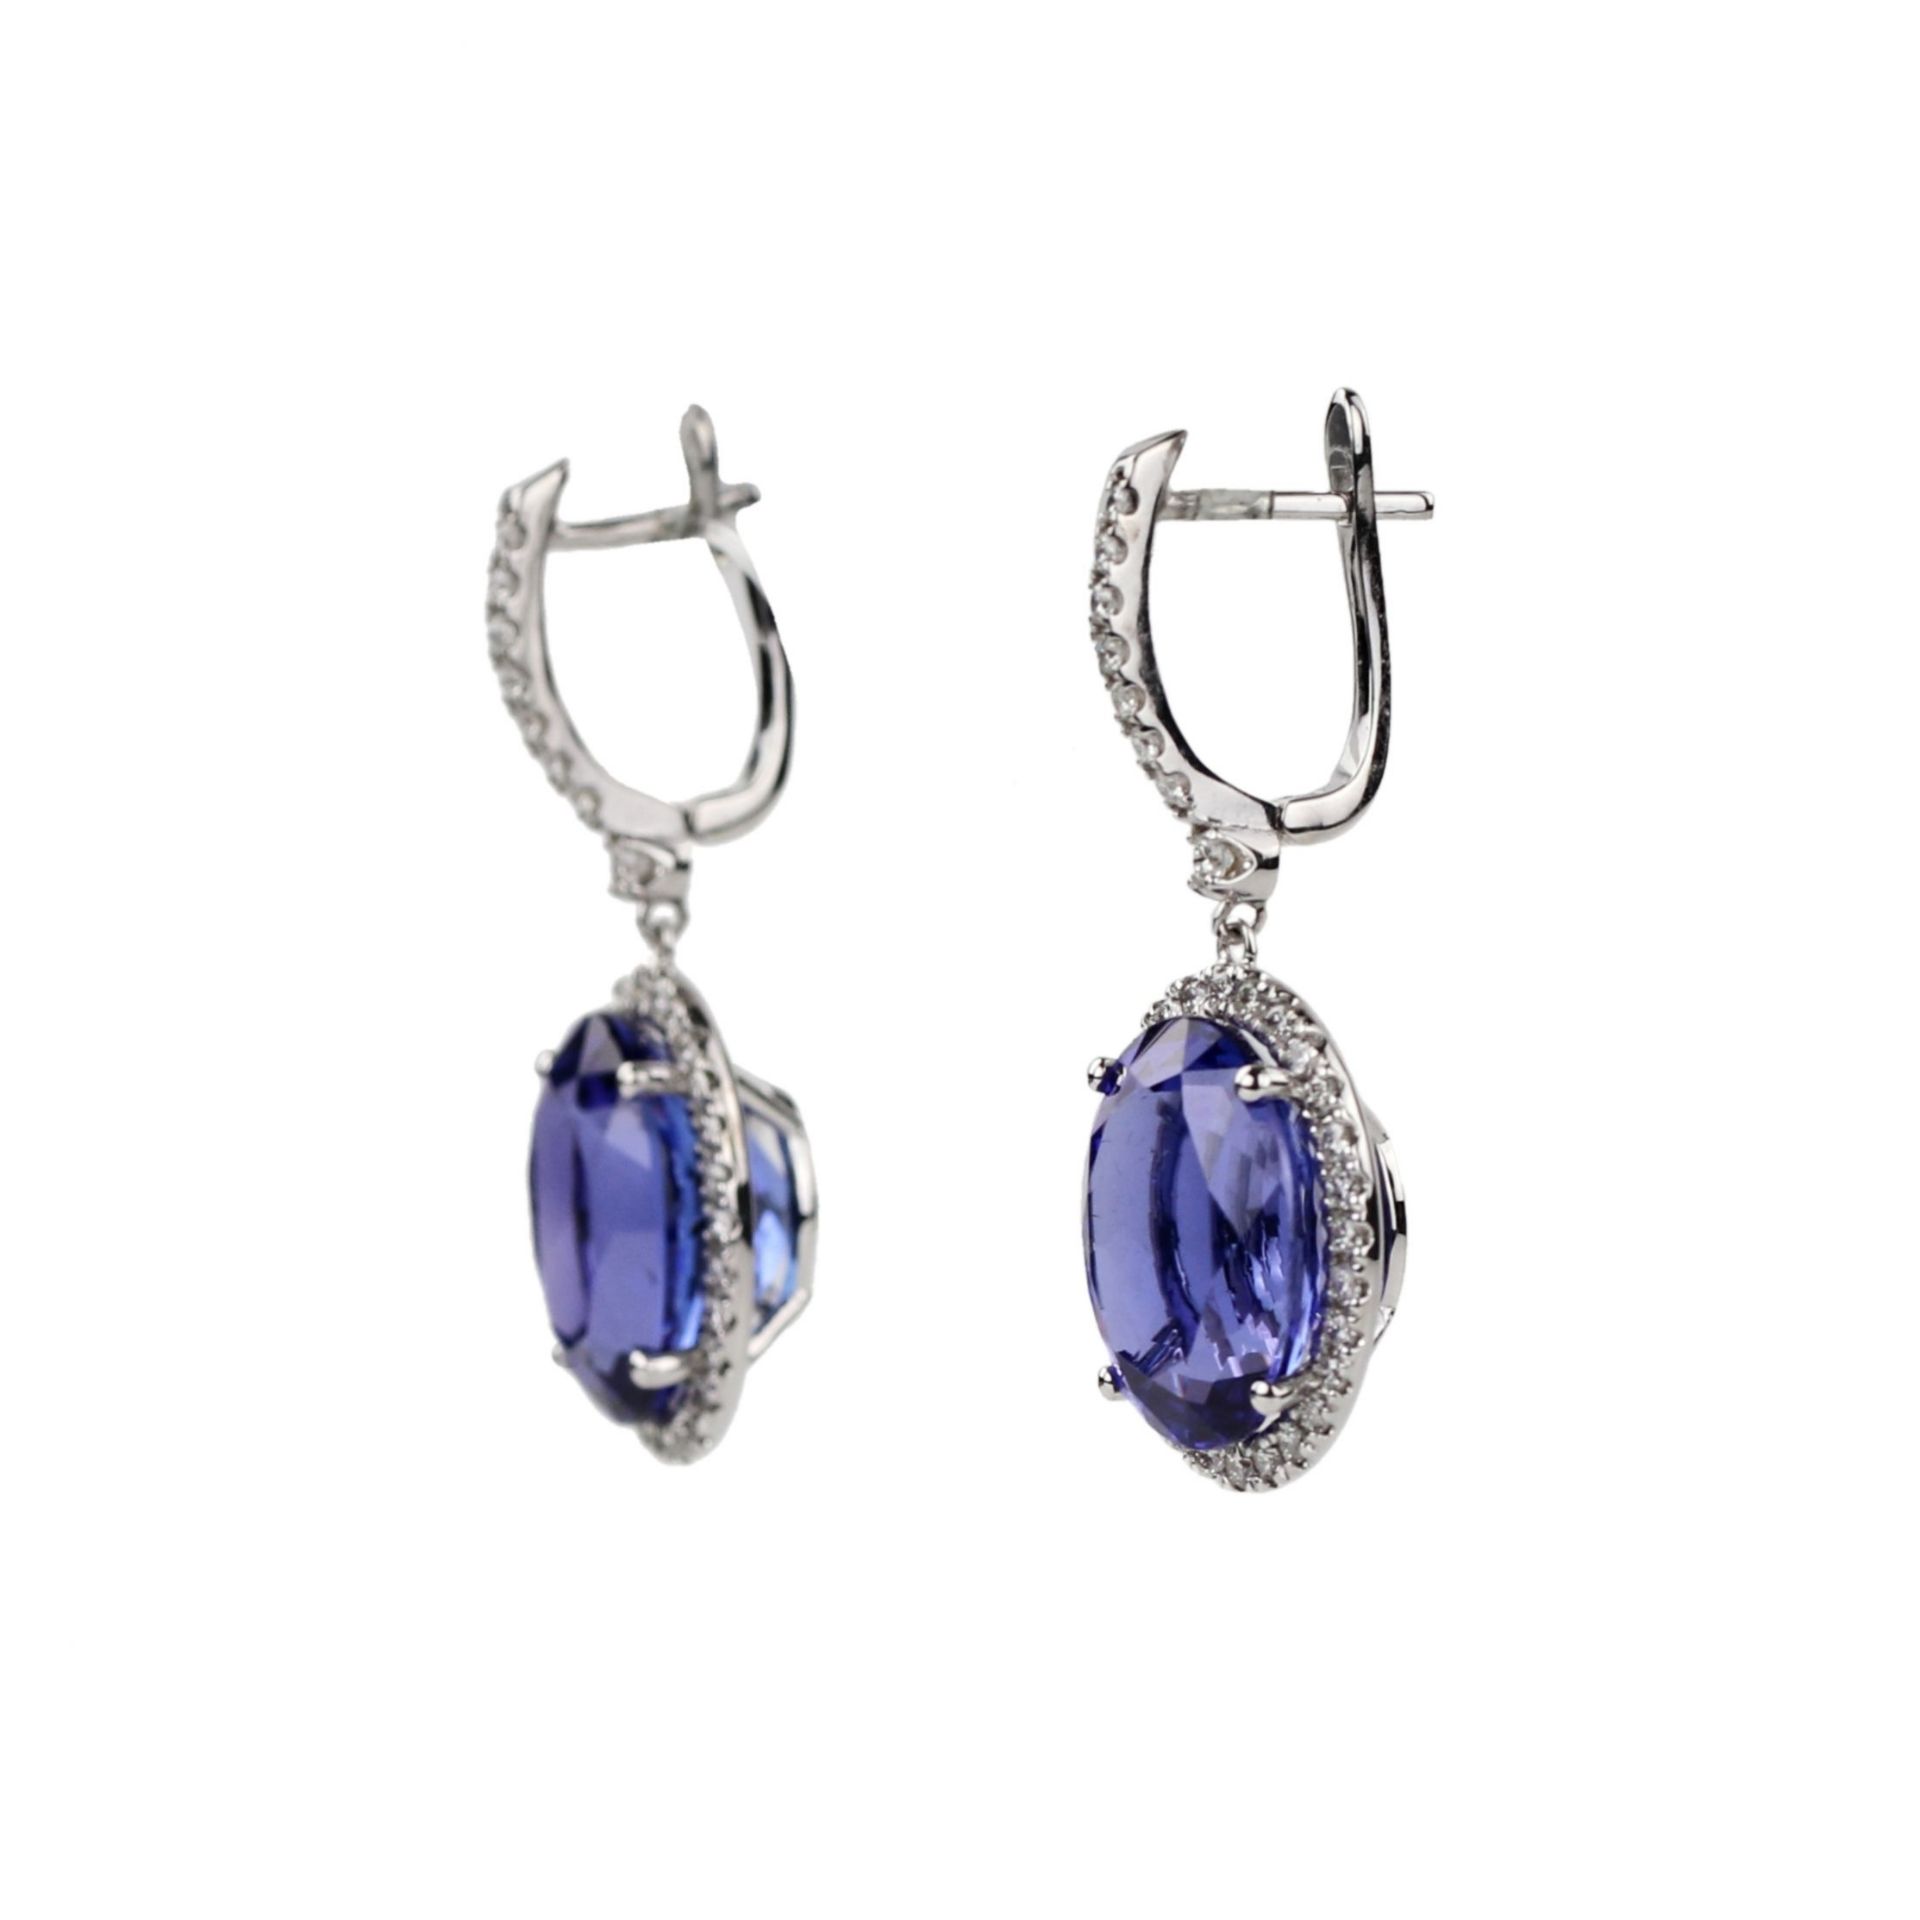 Manuel Spinosa. Gold earrings with tanzanites and diamonds. - Image 2 of 7